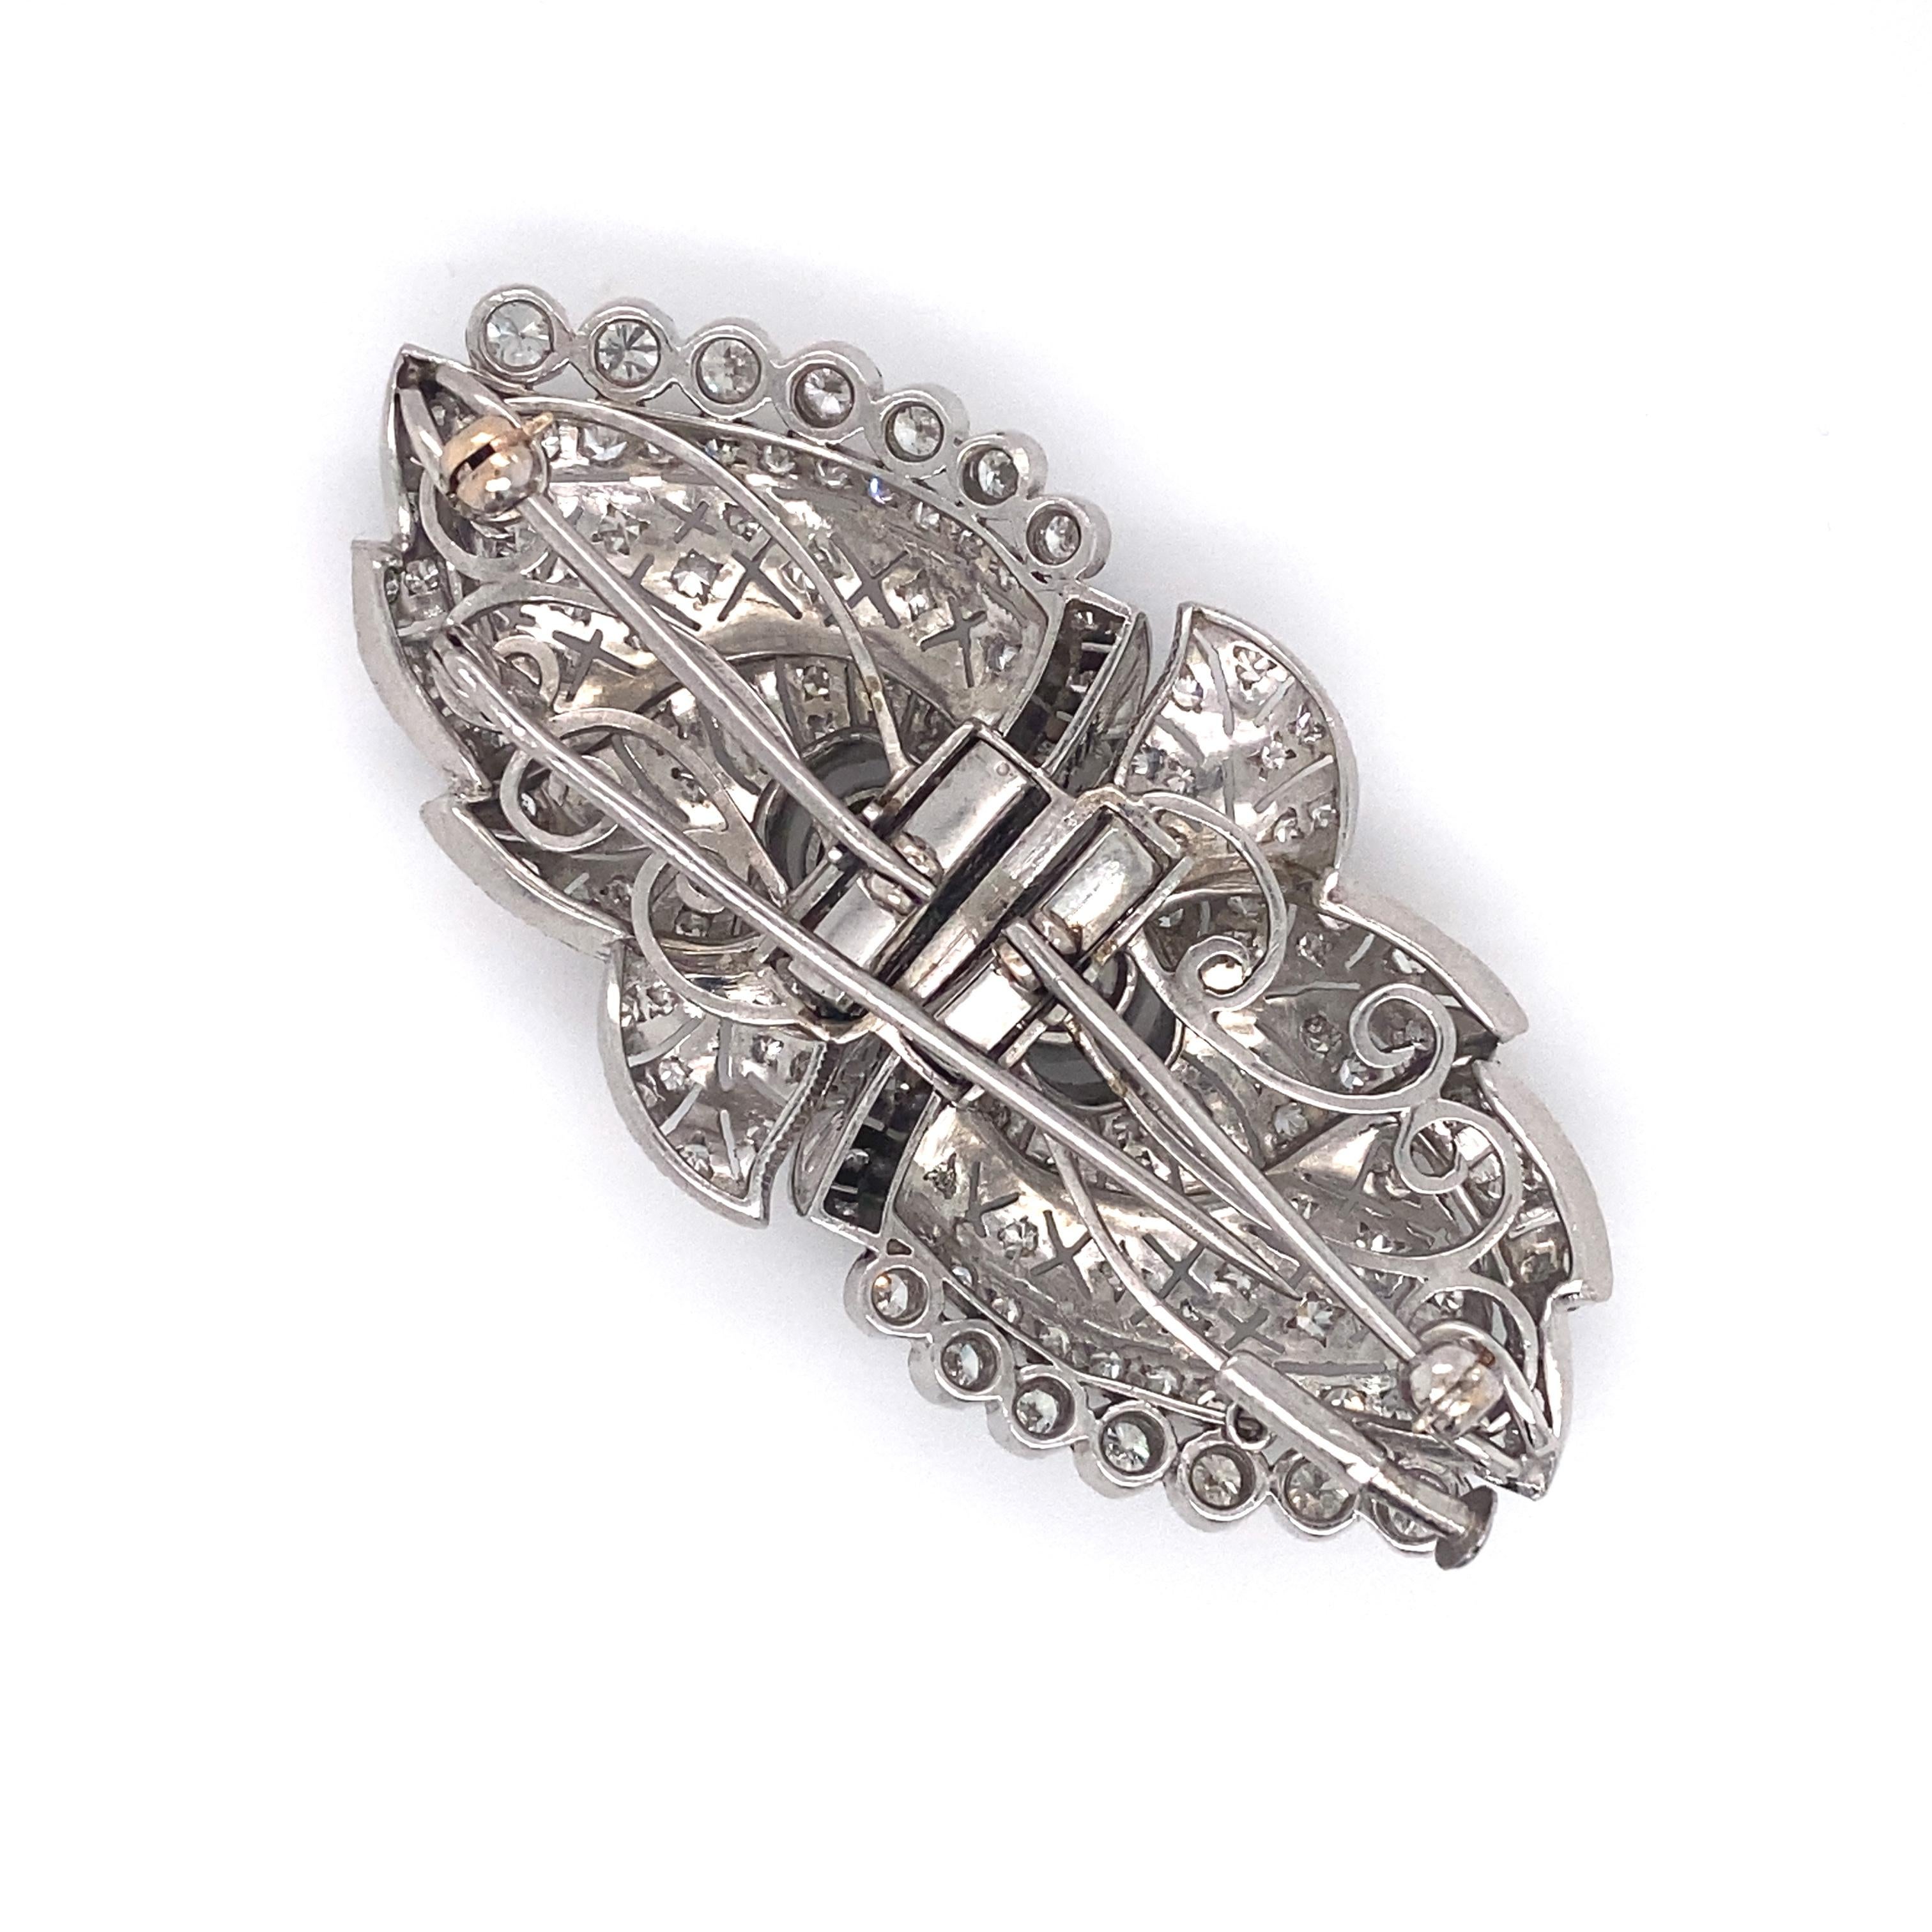 Item Details:
Circa: 1920
Metal Type: Platinum 
Weight: 42 grams

Diamond Details:
Carat: 8.0 carat total weight
Color: G
Clarity: VS
Cut: Mix of Single Cuts and Old European Diamonds

This is an art deco item from the 1920s
Platinum crafted.
It is